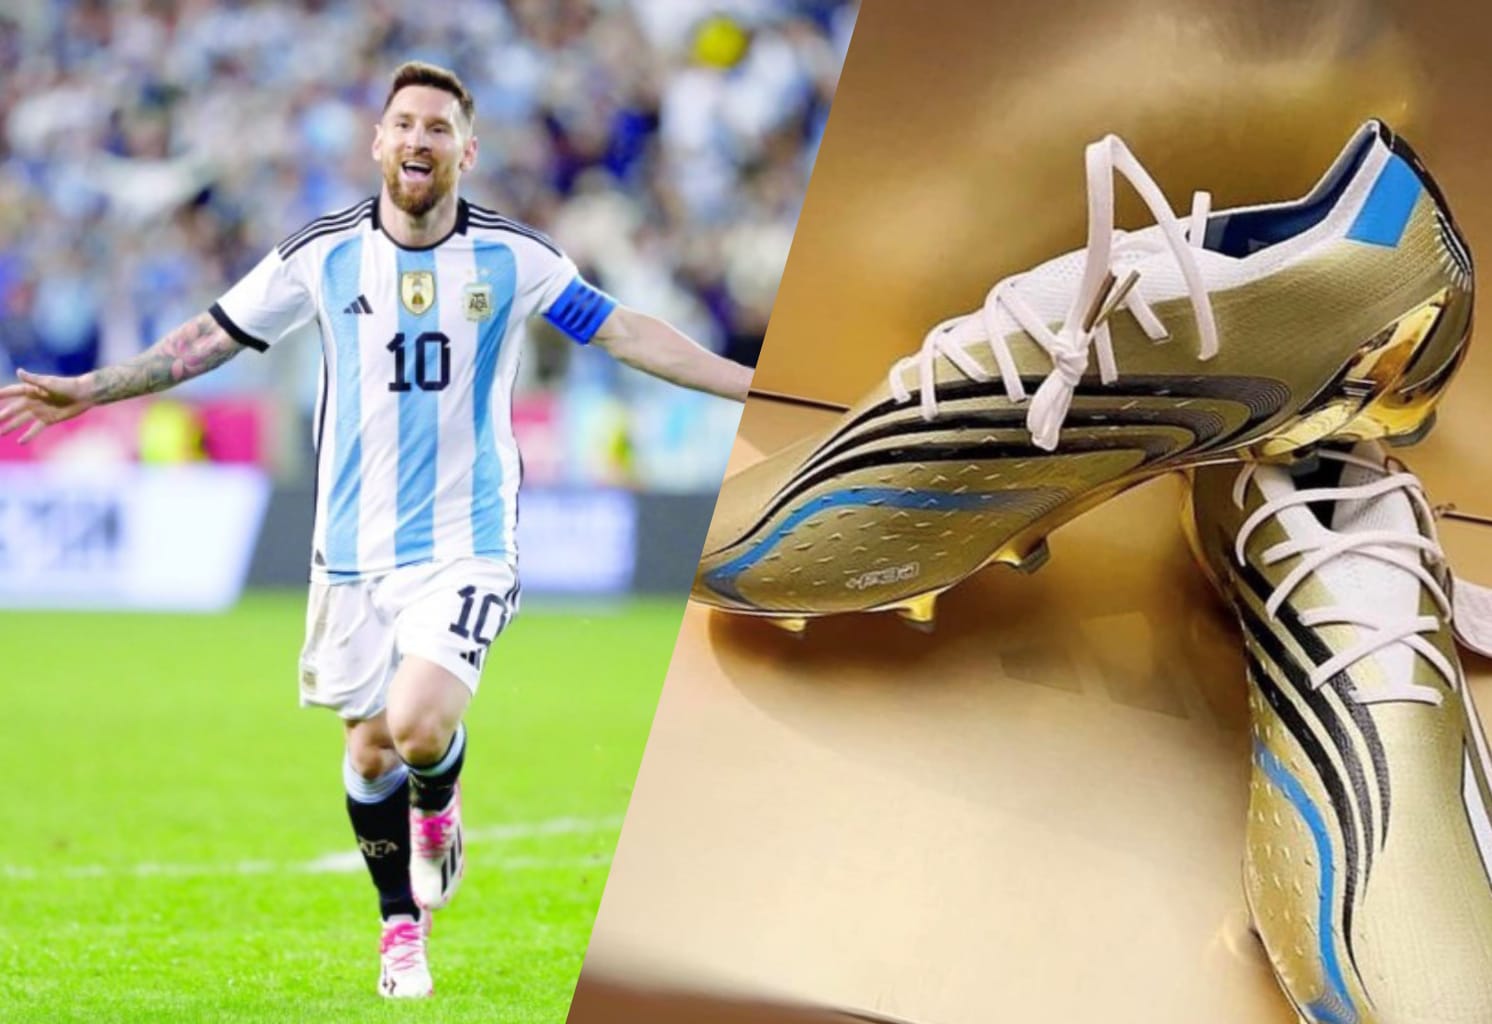 gateway slutpunkt Montgomery Lionel Messi's World Cup Boots: Lionel Messi's boots from Adidas for  upcoming FIFA World Cup revealed